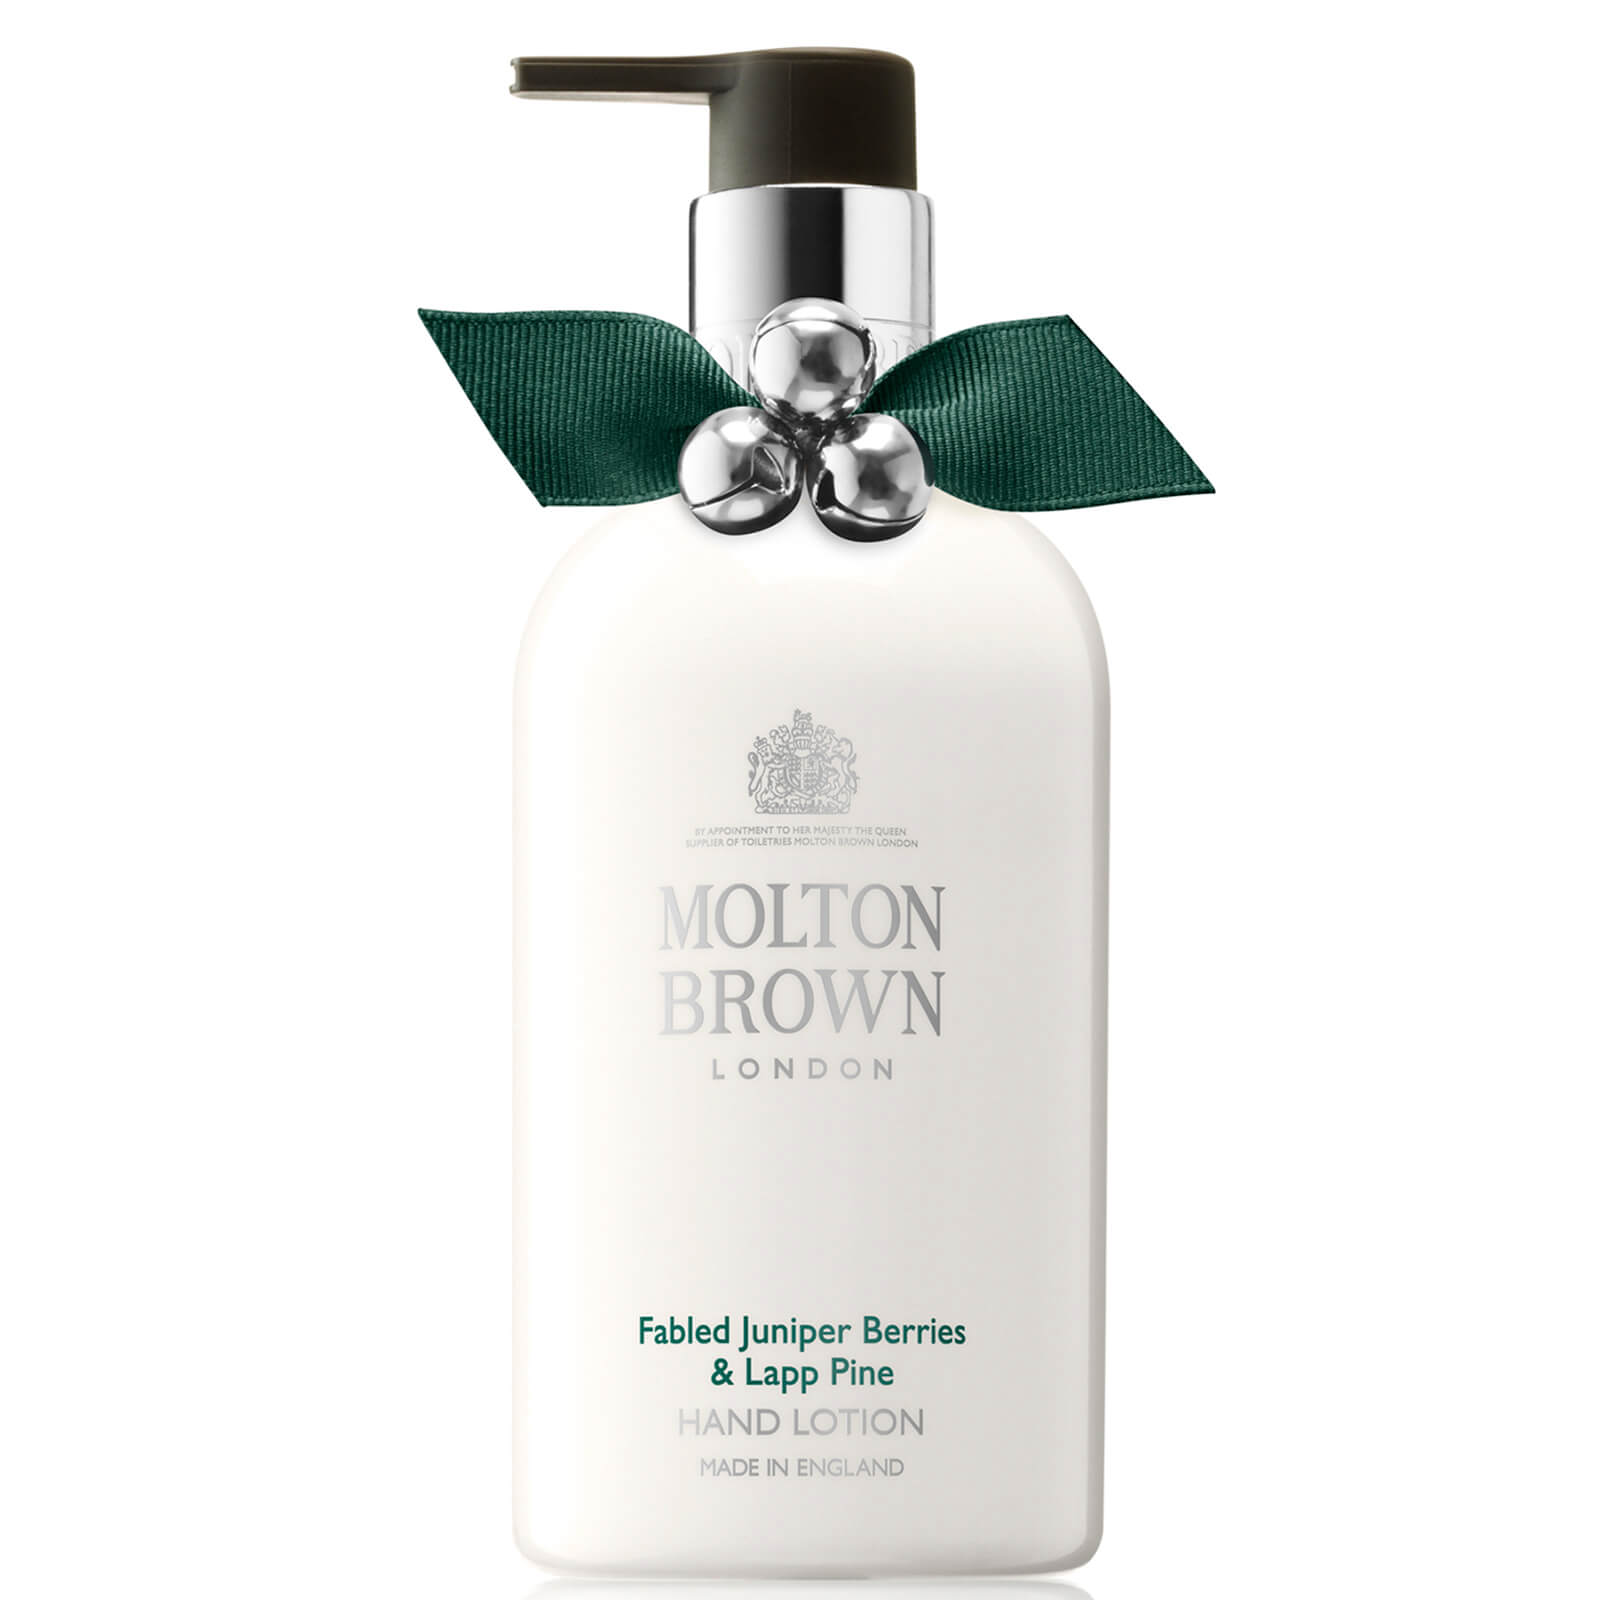 Molton Brown Fabled Juniper Berries and Lapp Pine Hand Lotion 300ml